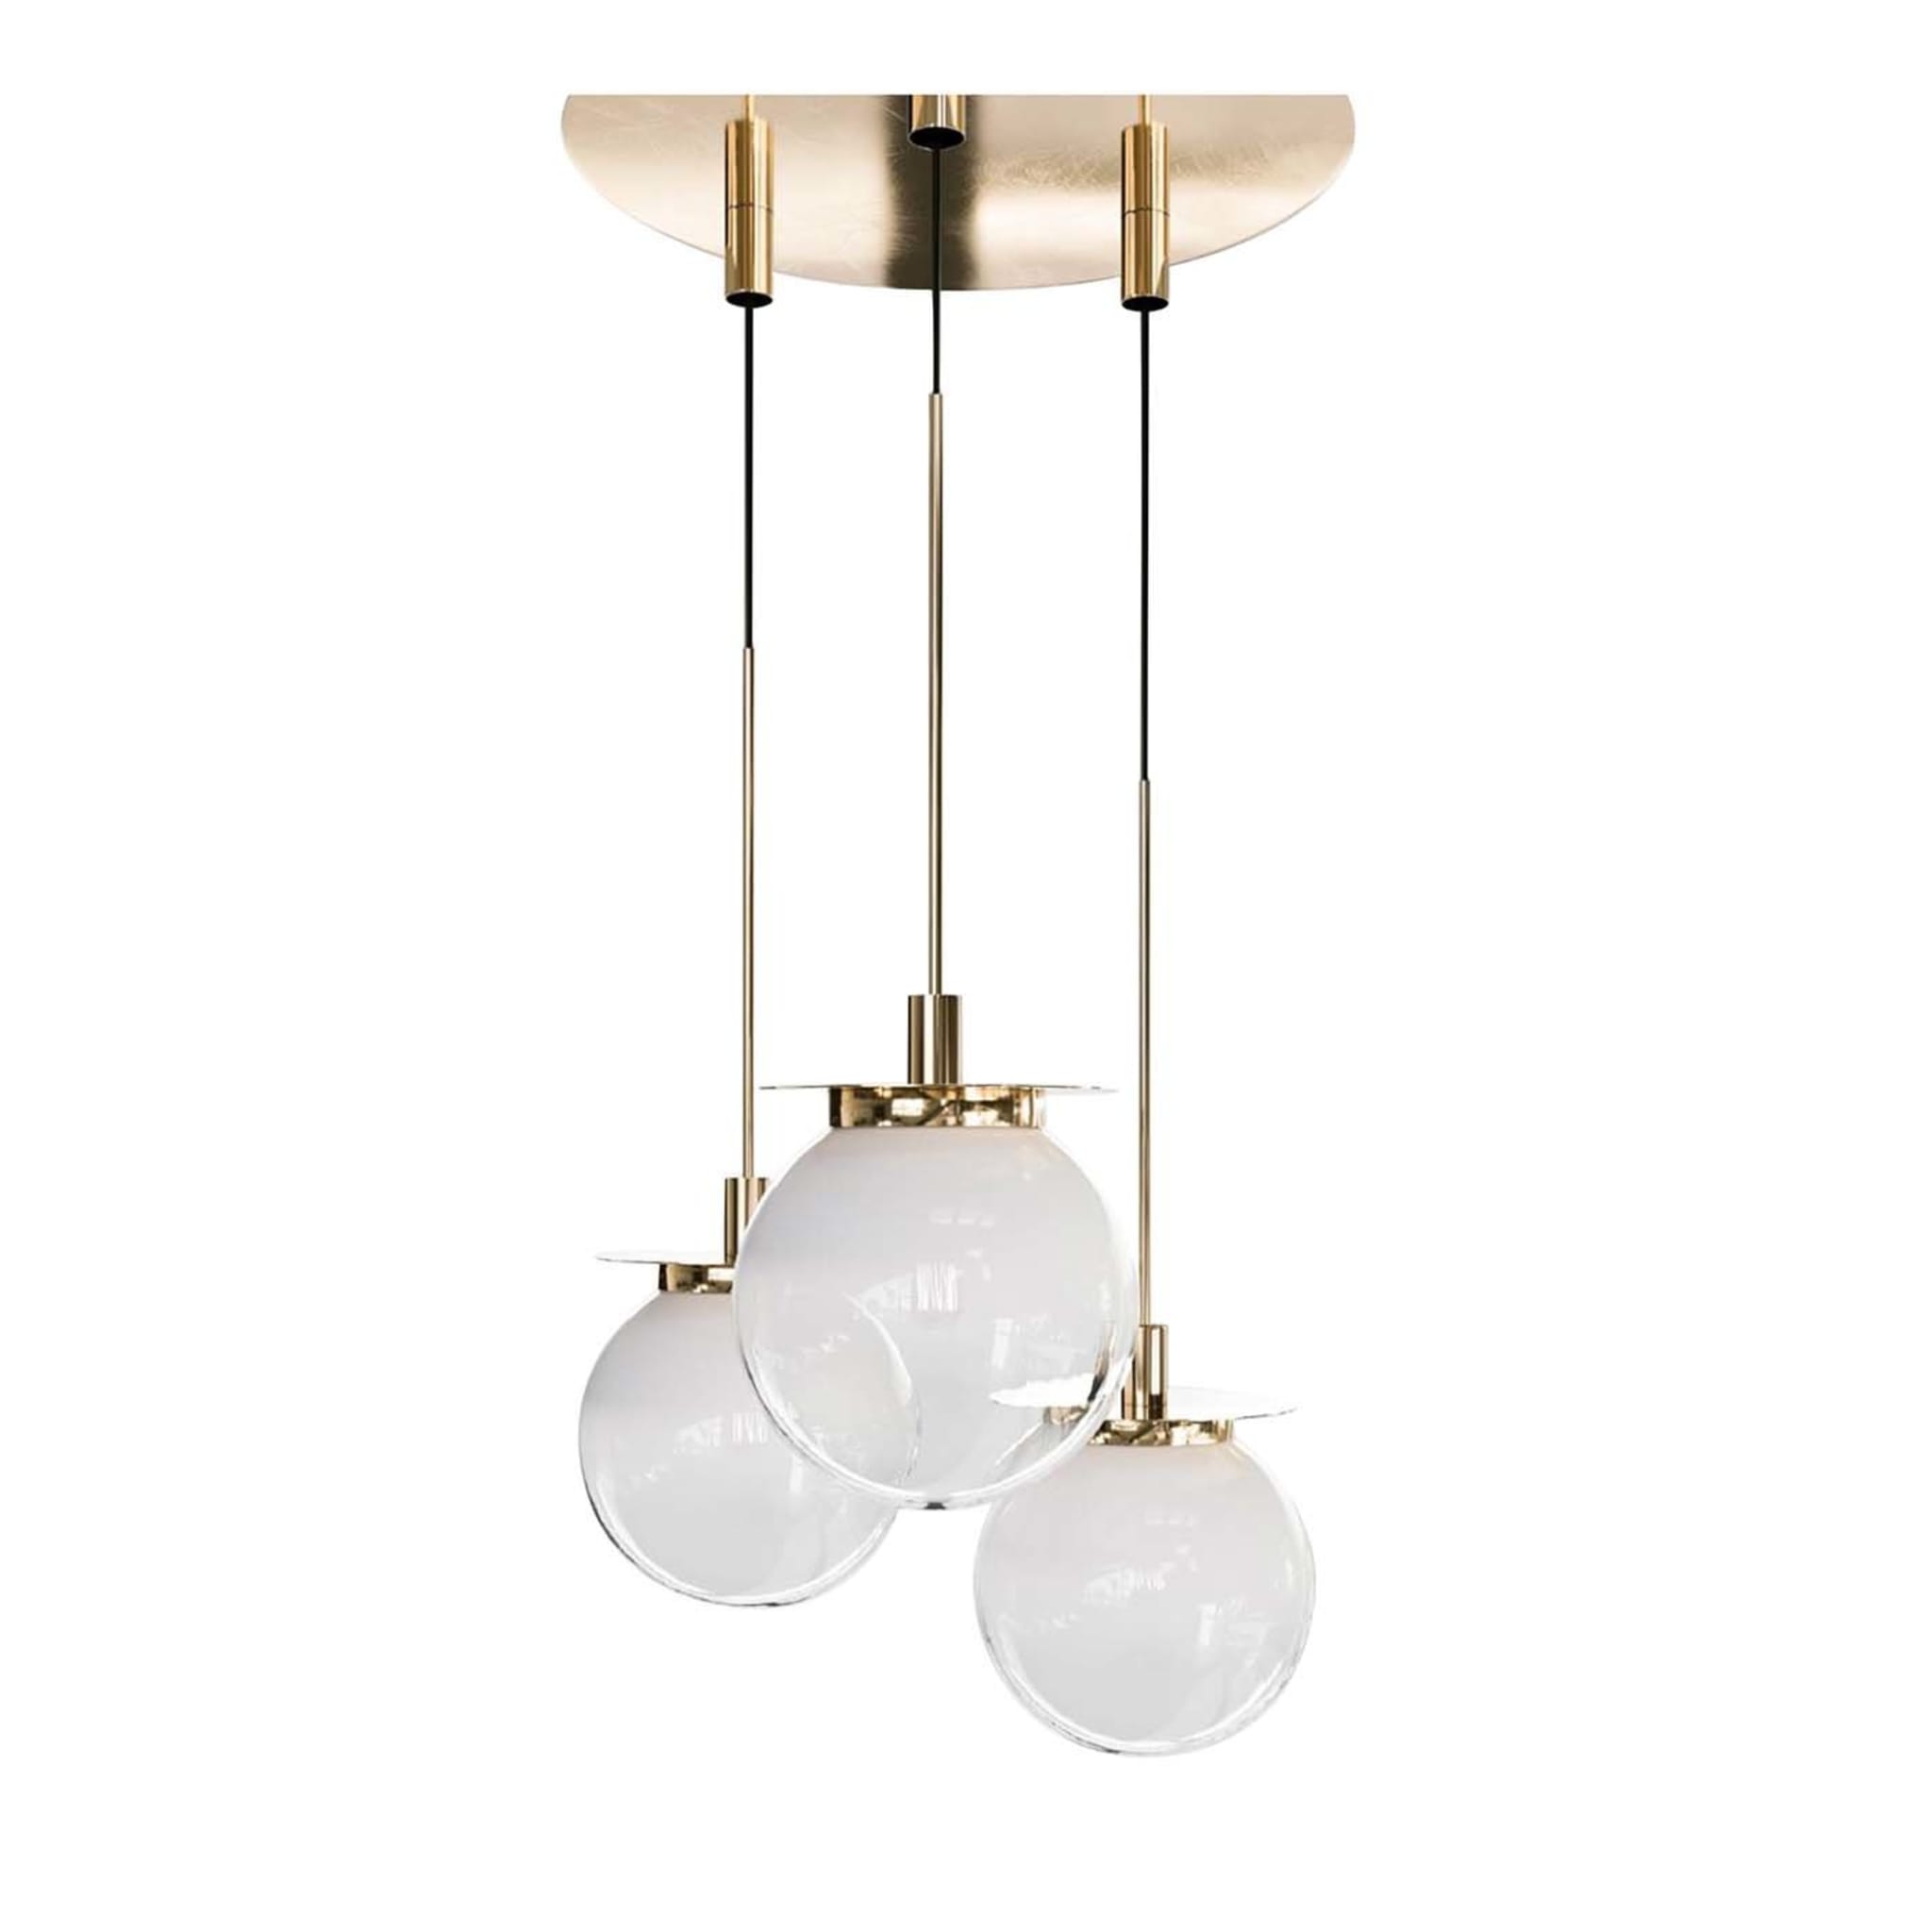 Eclat d'eau PENDANT LAMP 3-LIGHTS WHITE AND BRASS - Main view